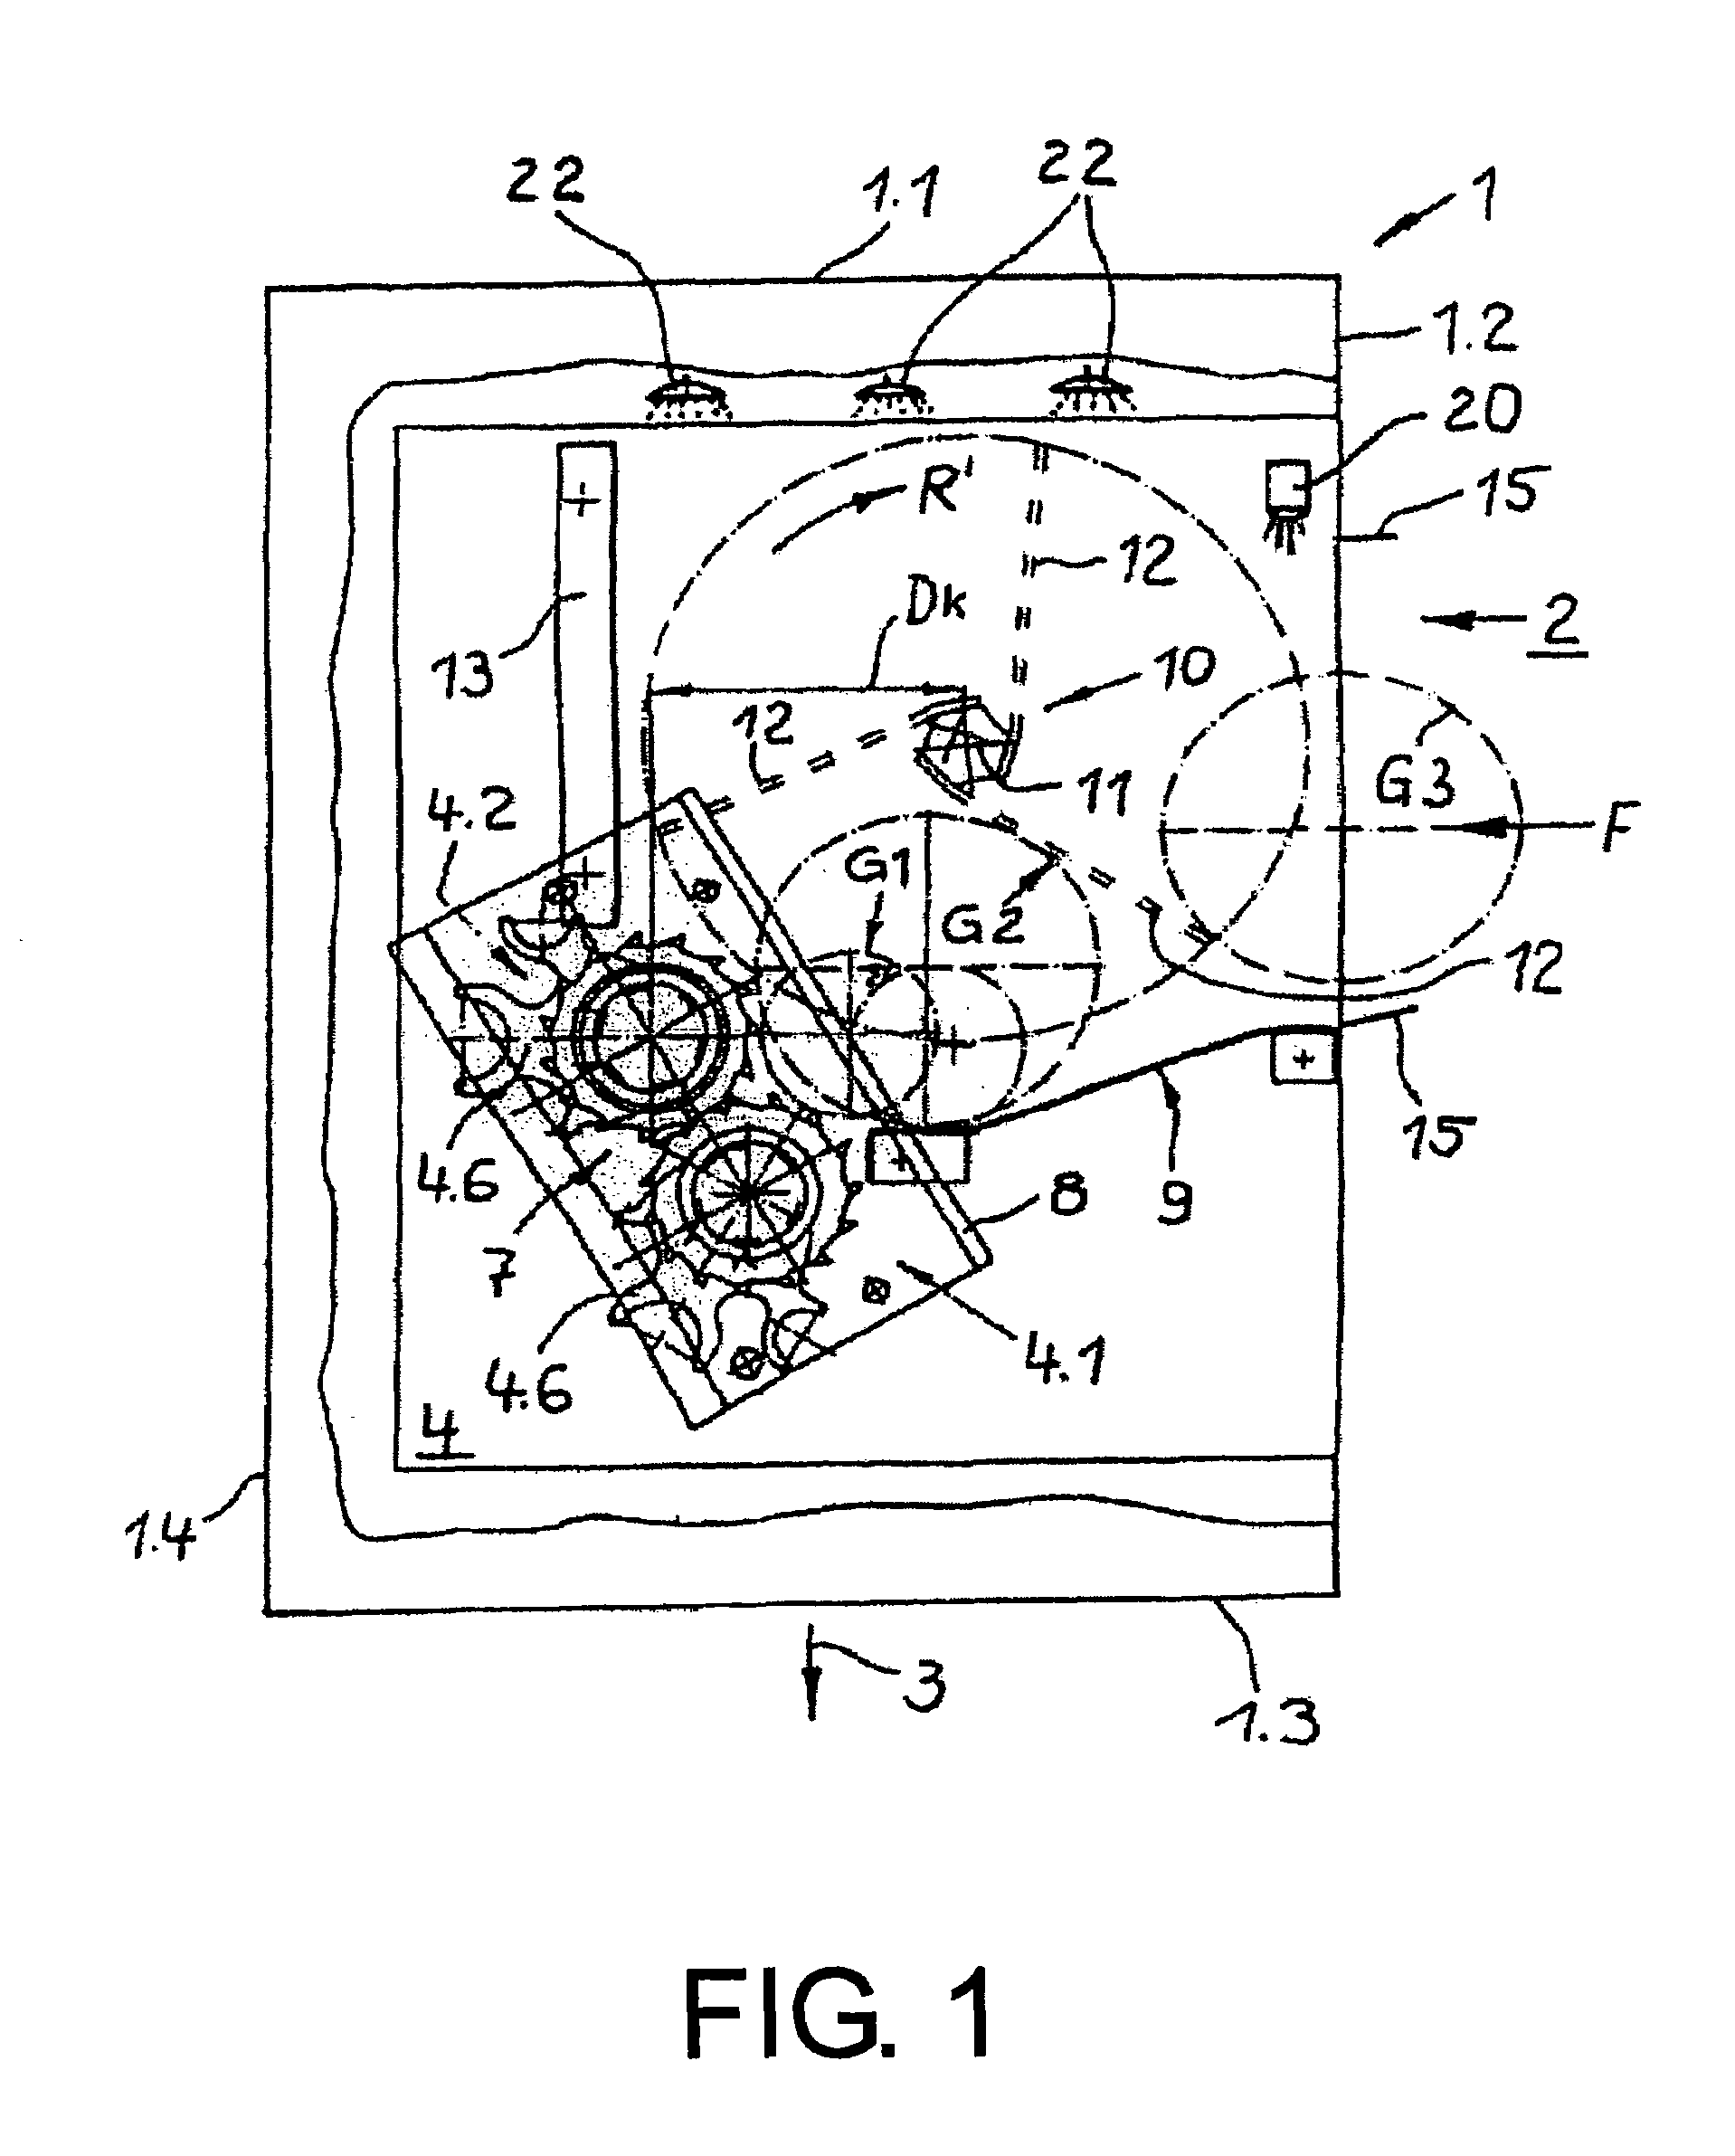 Device for pressing empty containers together and method therefor